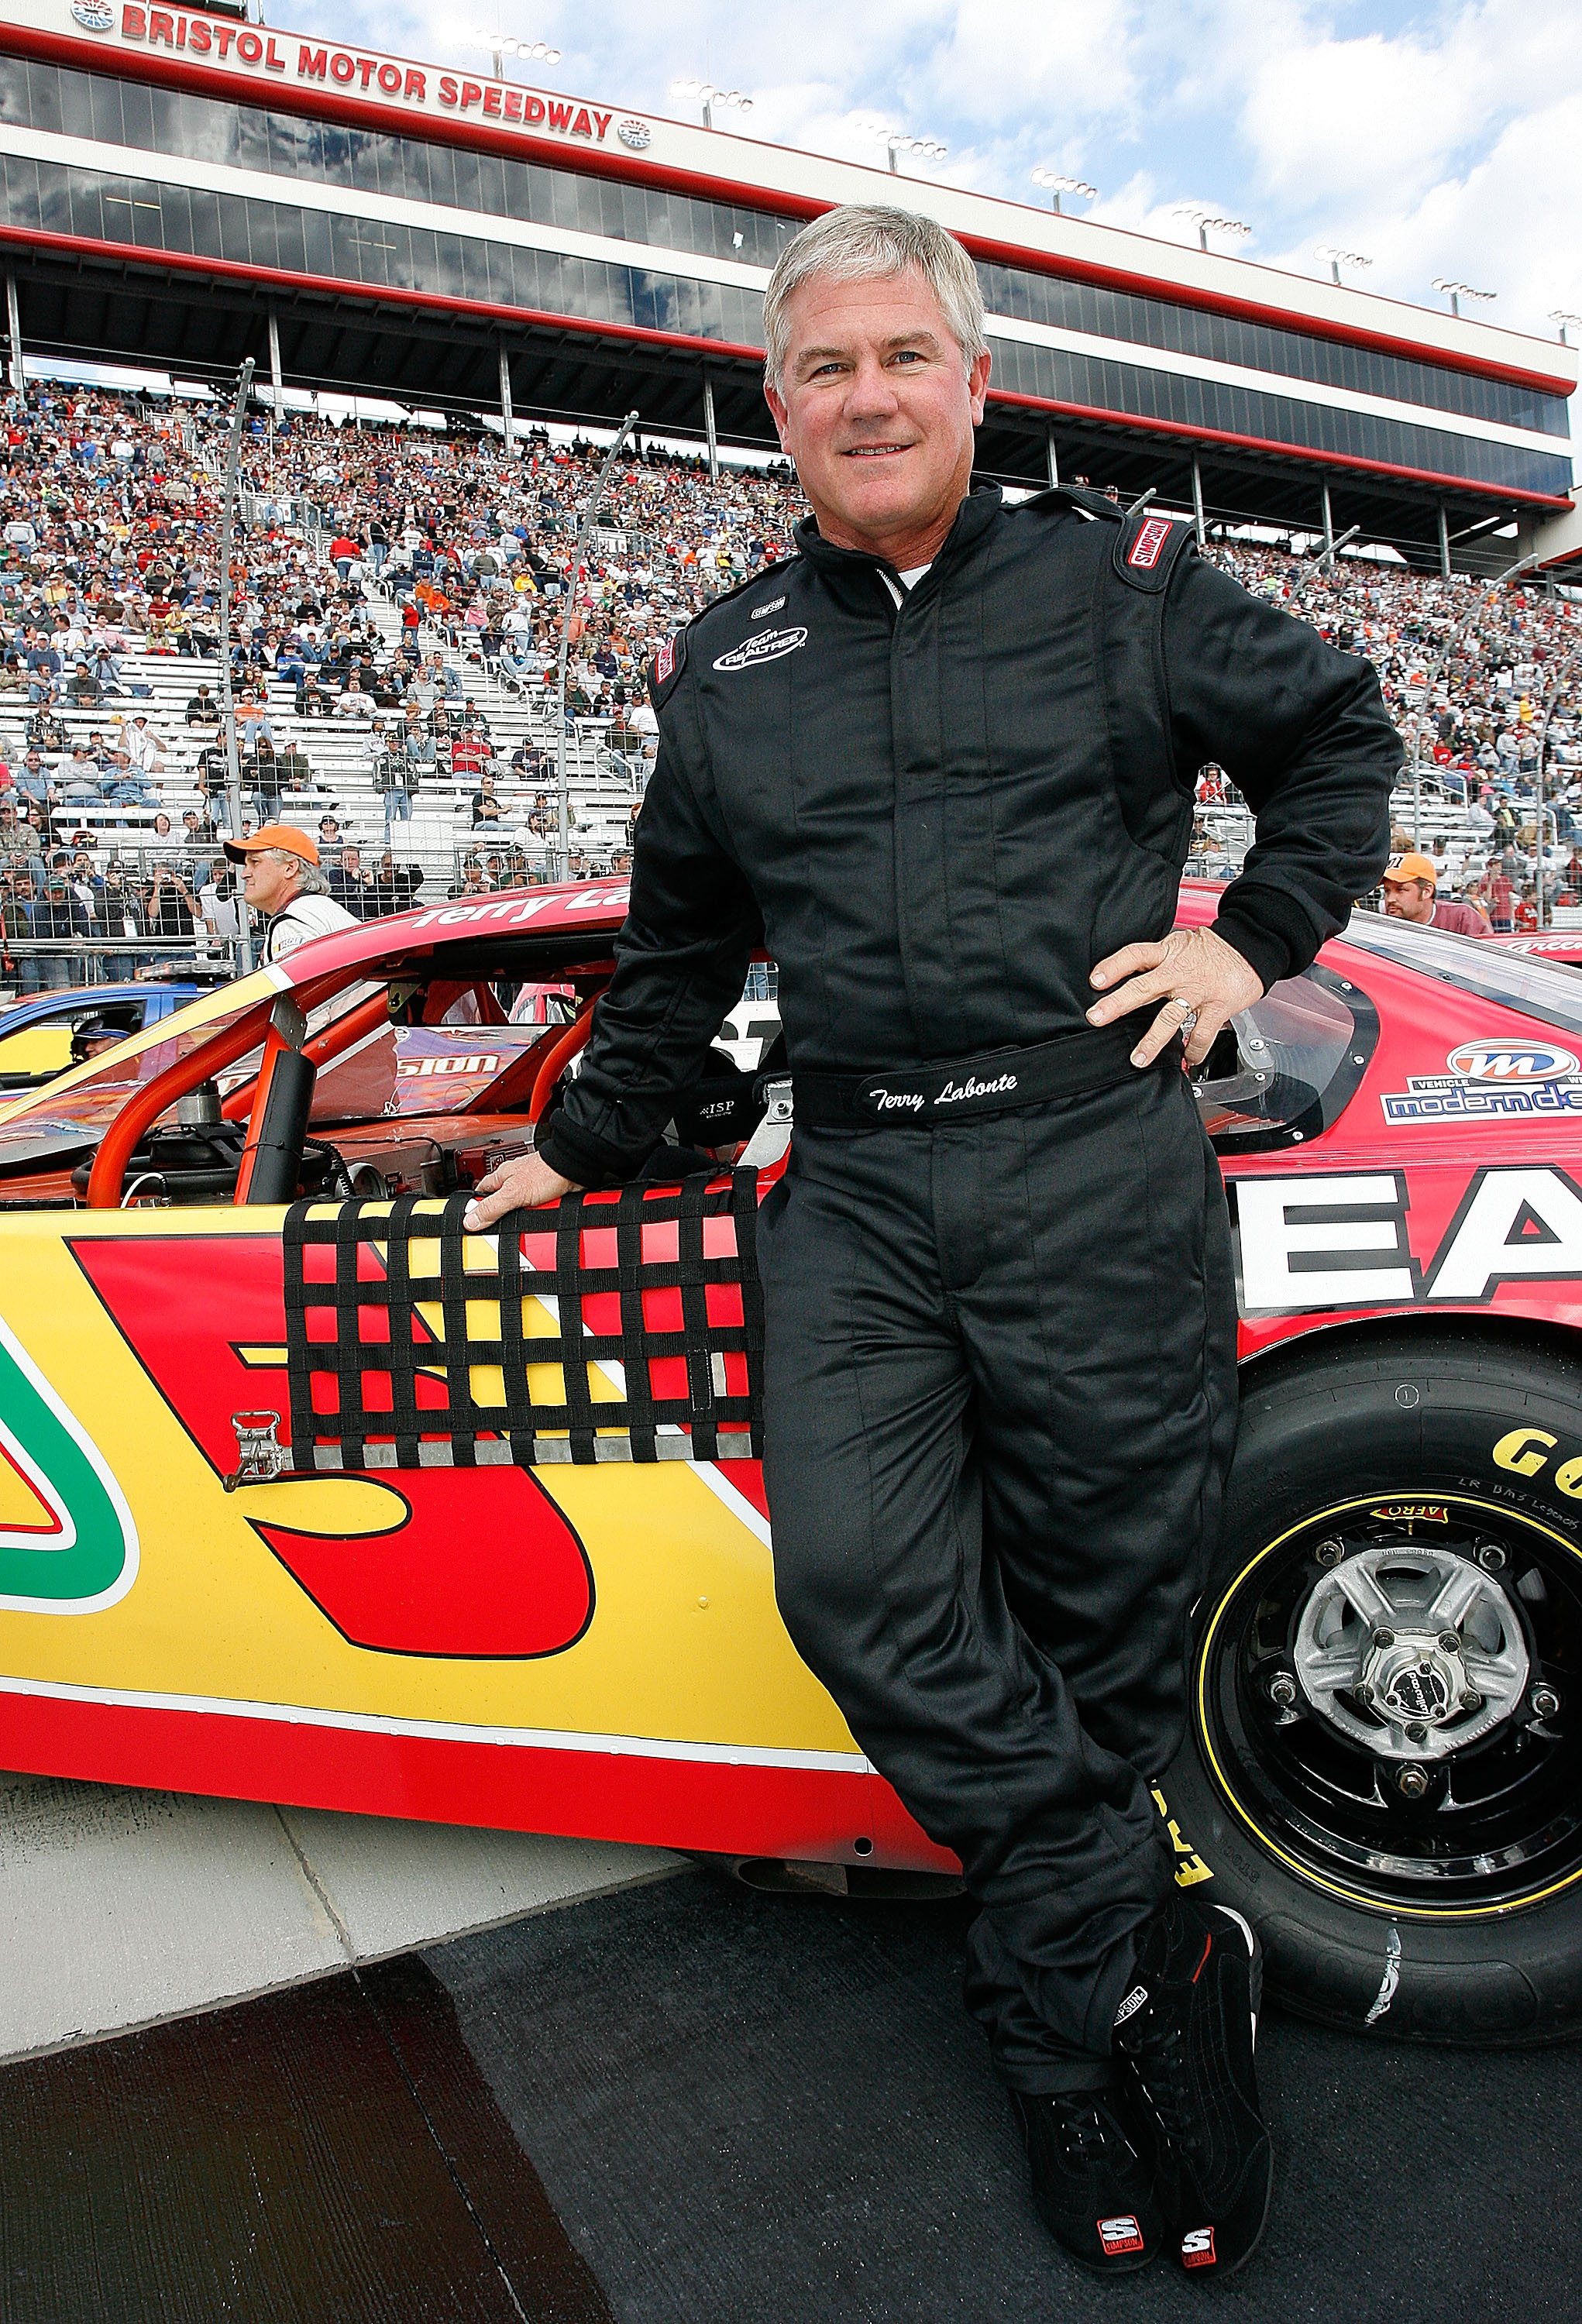 BRISTOL, TN - MARCH 21: Nascar Legend Terry Labonte stands by his car before the NASCAR Legends UARA Race at Bristol Motor Speedway on March 21, 2009 in Bristol, Tennessee.  (Photo by John Harrelson/Getty Images)